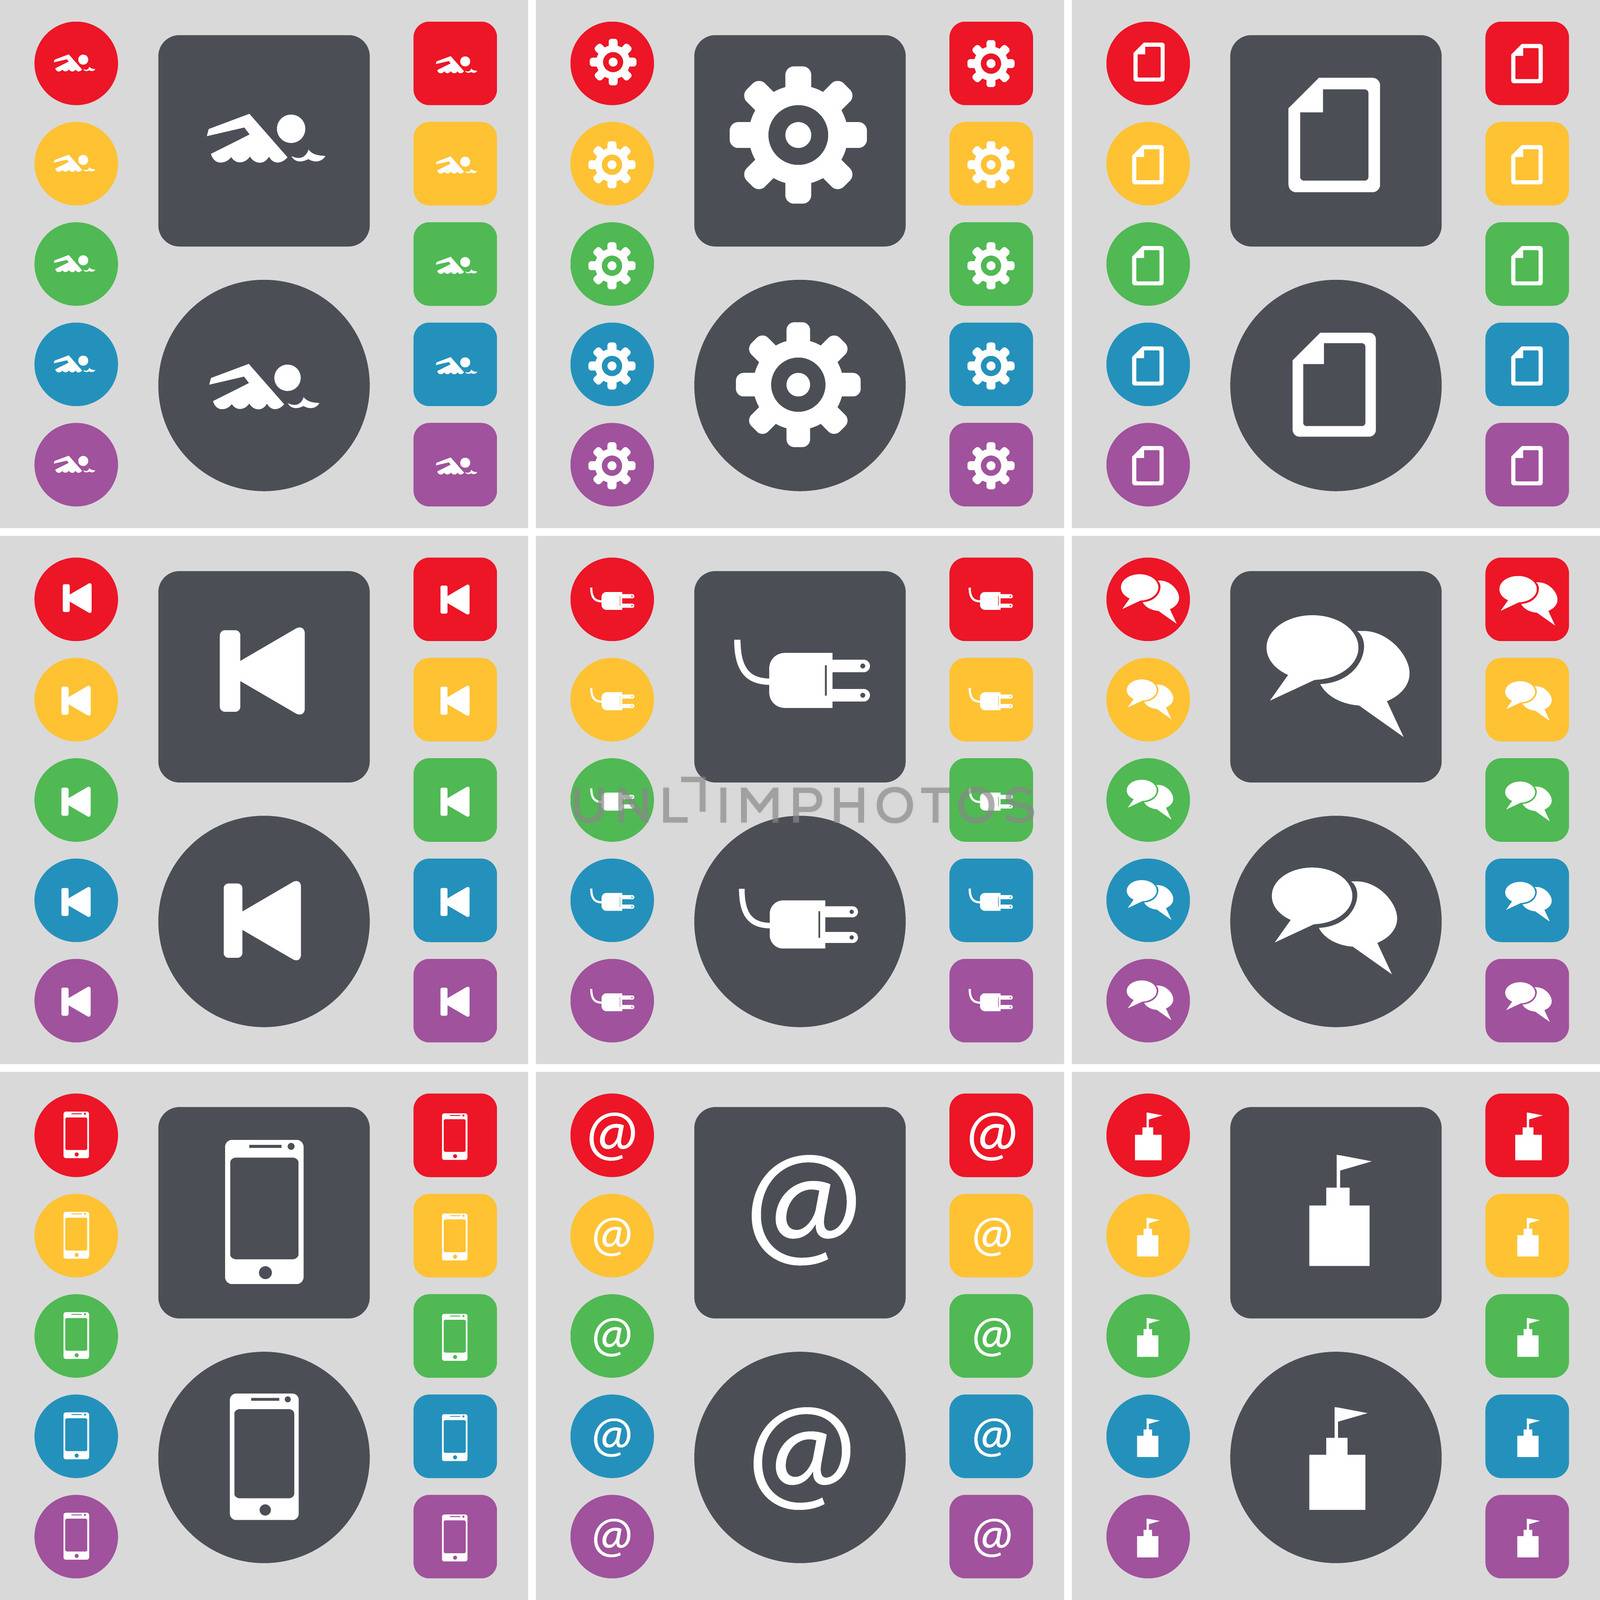 Swimmer, Gear, File, Media skip, Socket, Chat, Smartphone, Mail, Flag tower icon symbol. A large set of flat, colored buttons for your design.  by serhii_lohvyniuk